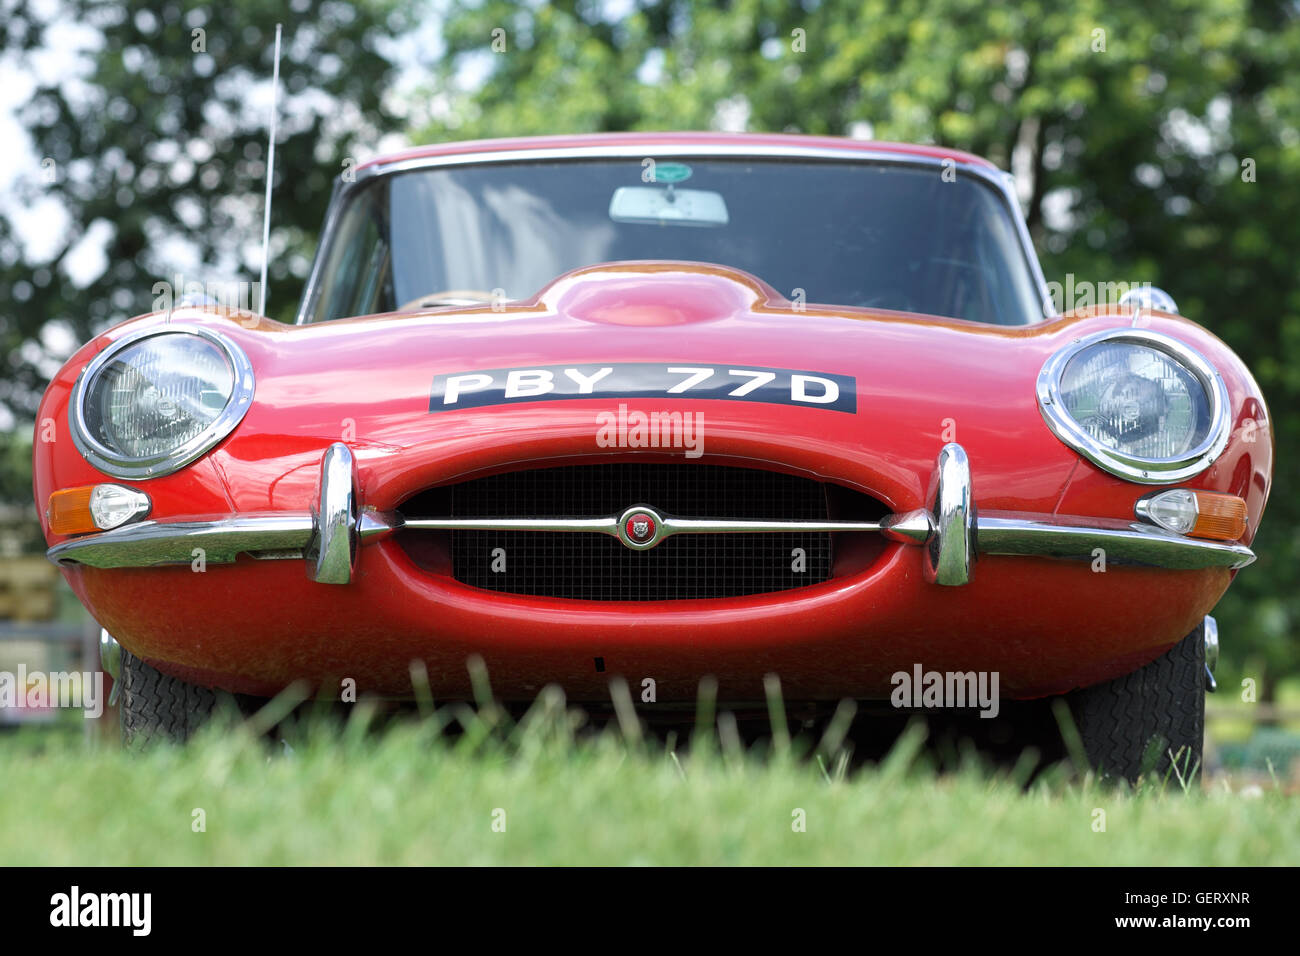 Jaguar E Type 2+2 sports car red British design built in the mid 1960s Sixties Stock Photo